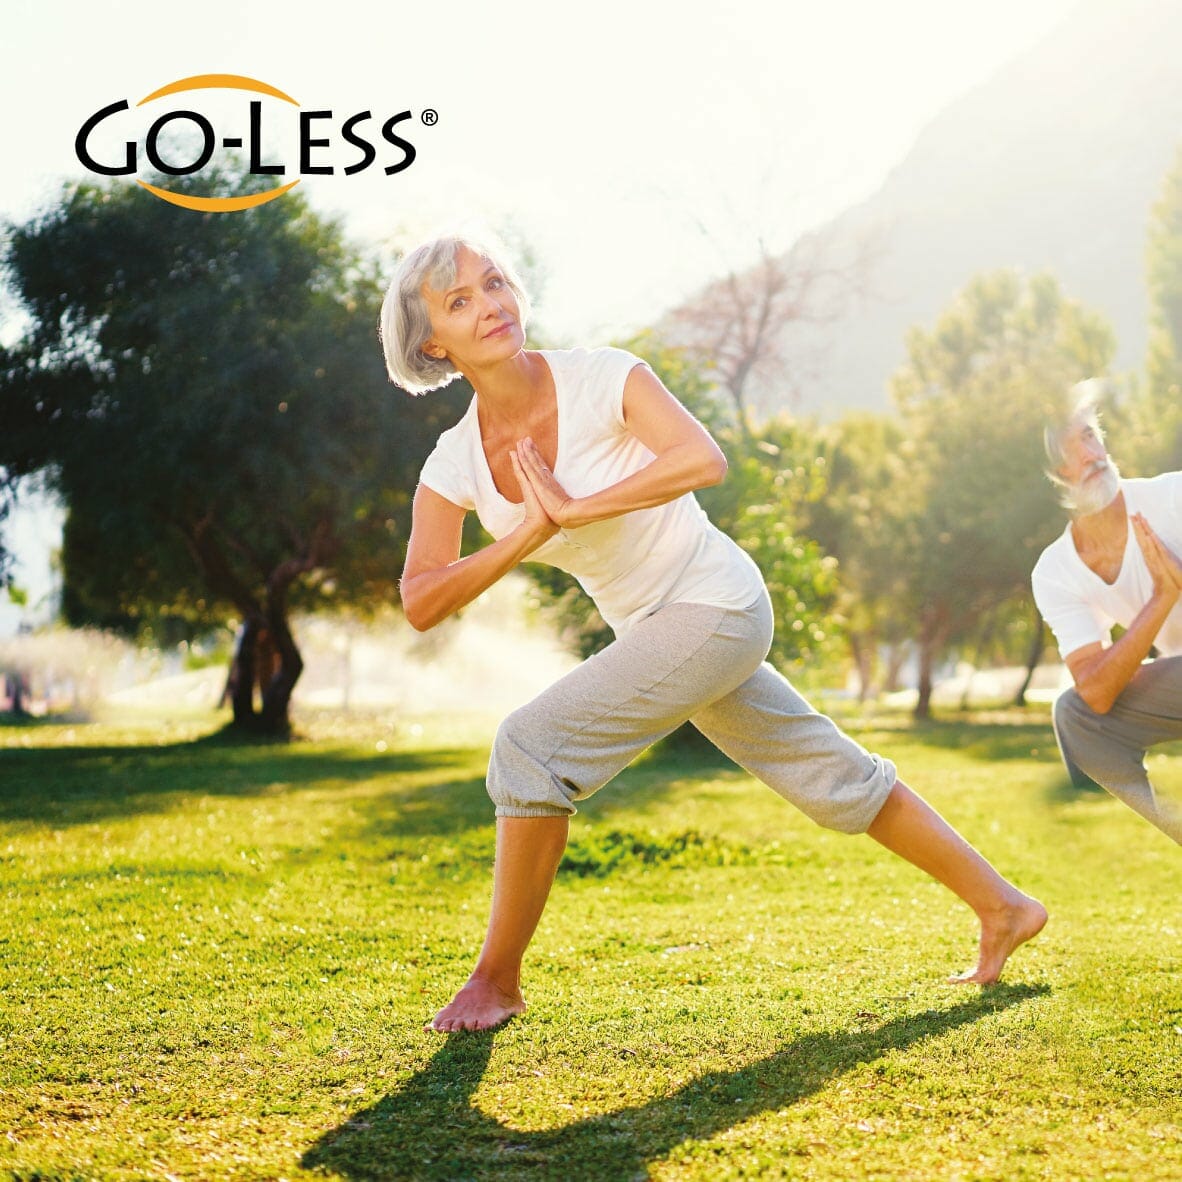 Clinical study shows high effectiveness of Go-Less®